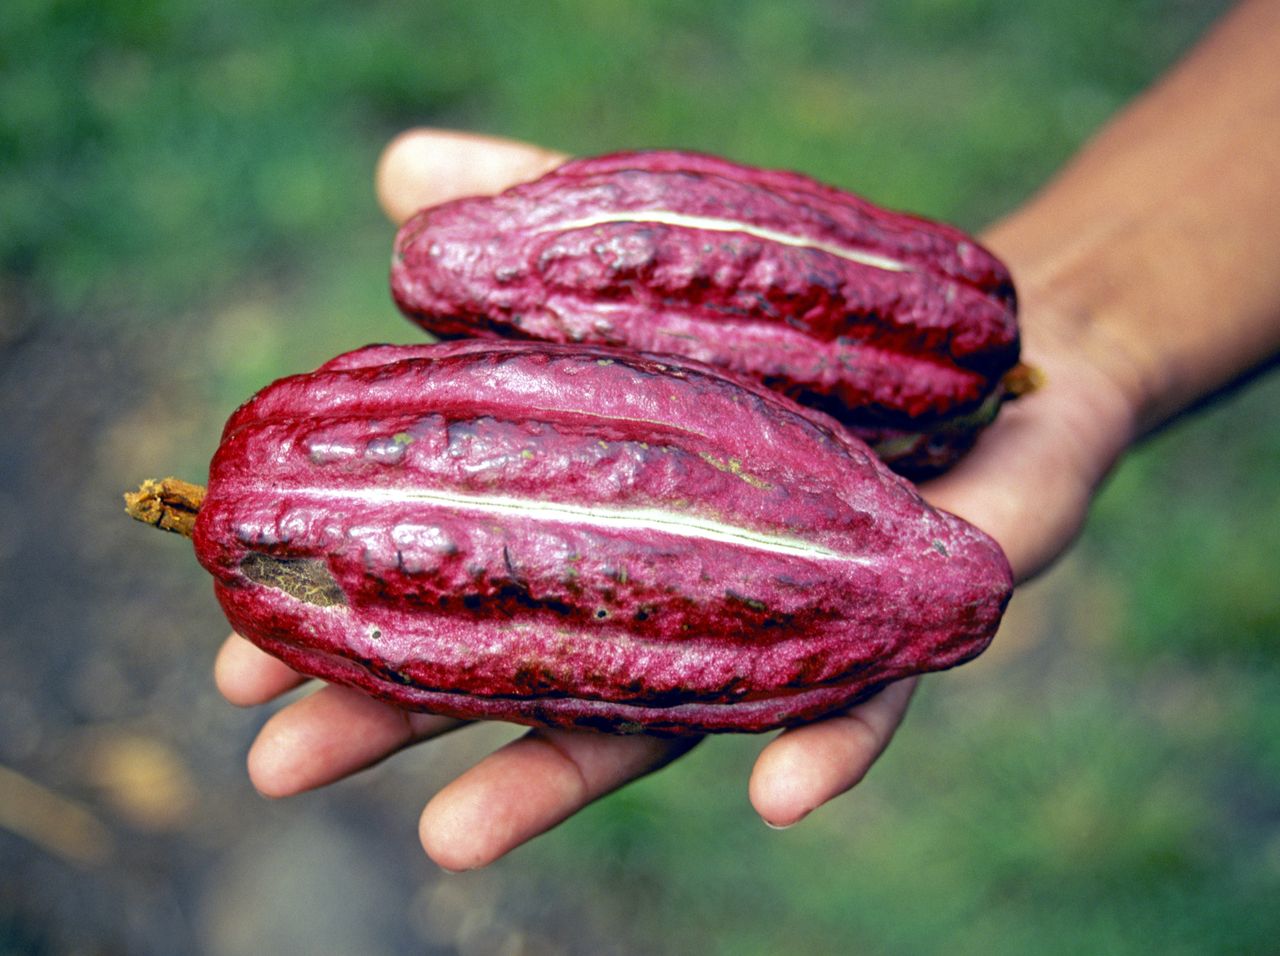 Cocoa prices hit record highs: Supply woes, speculation, and the impact on chocolate